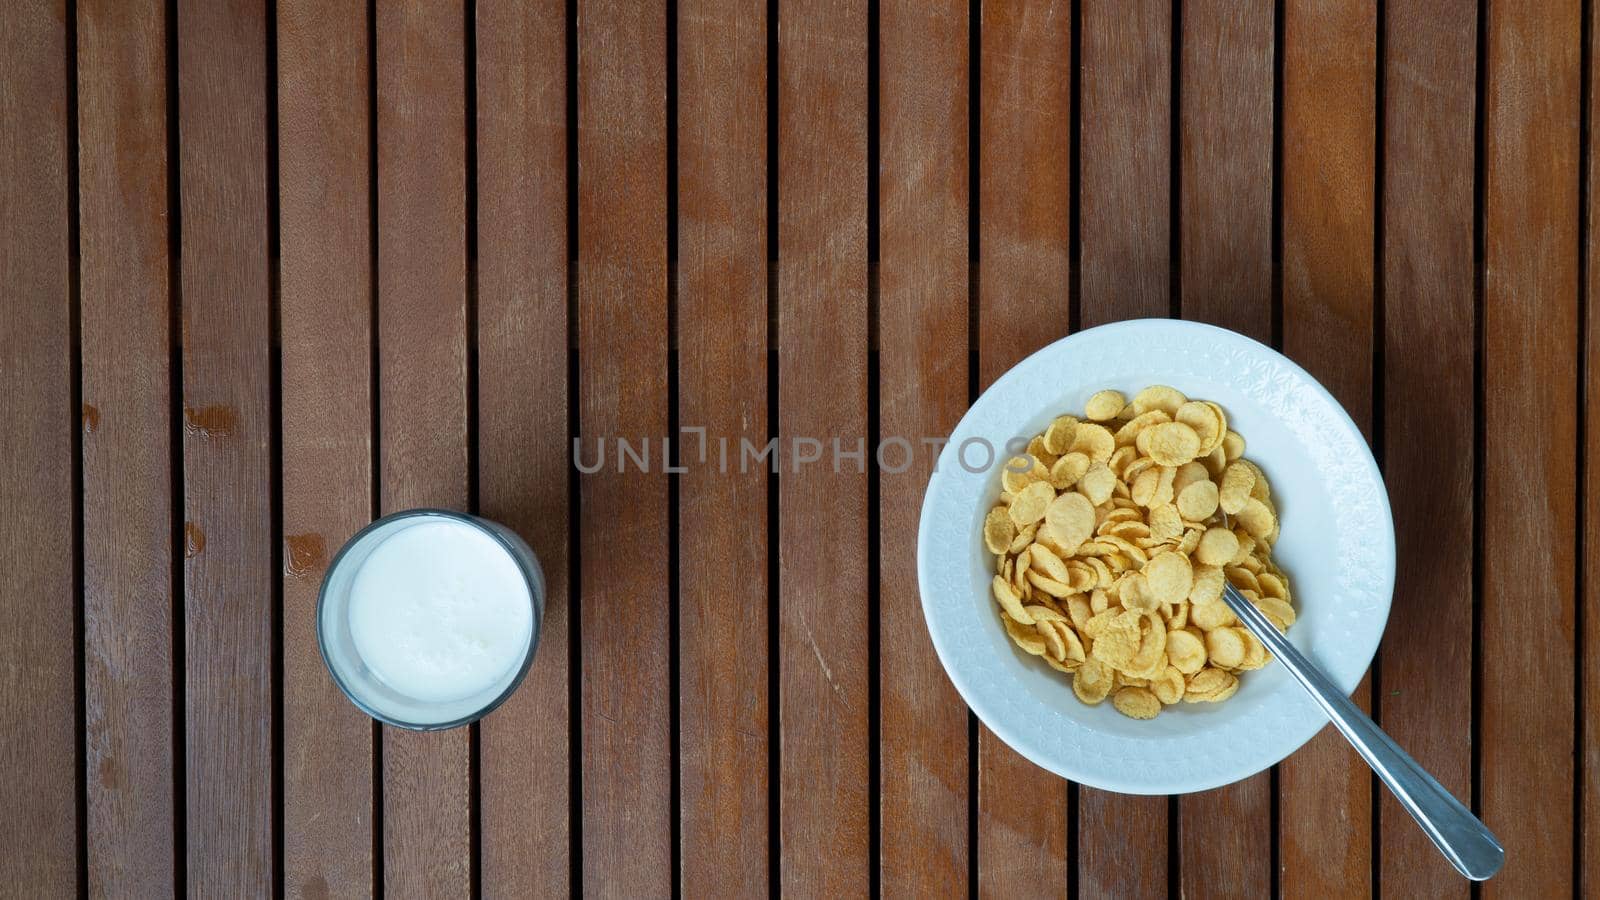 A plate of corn flakes on the right and a glass of milk on the left background. High quality photo